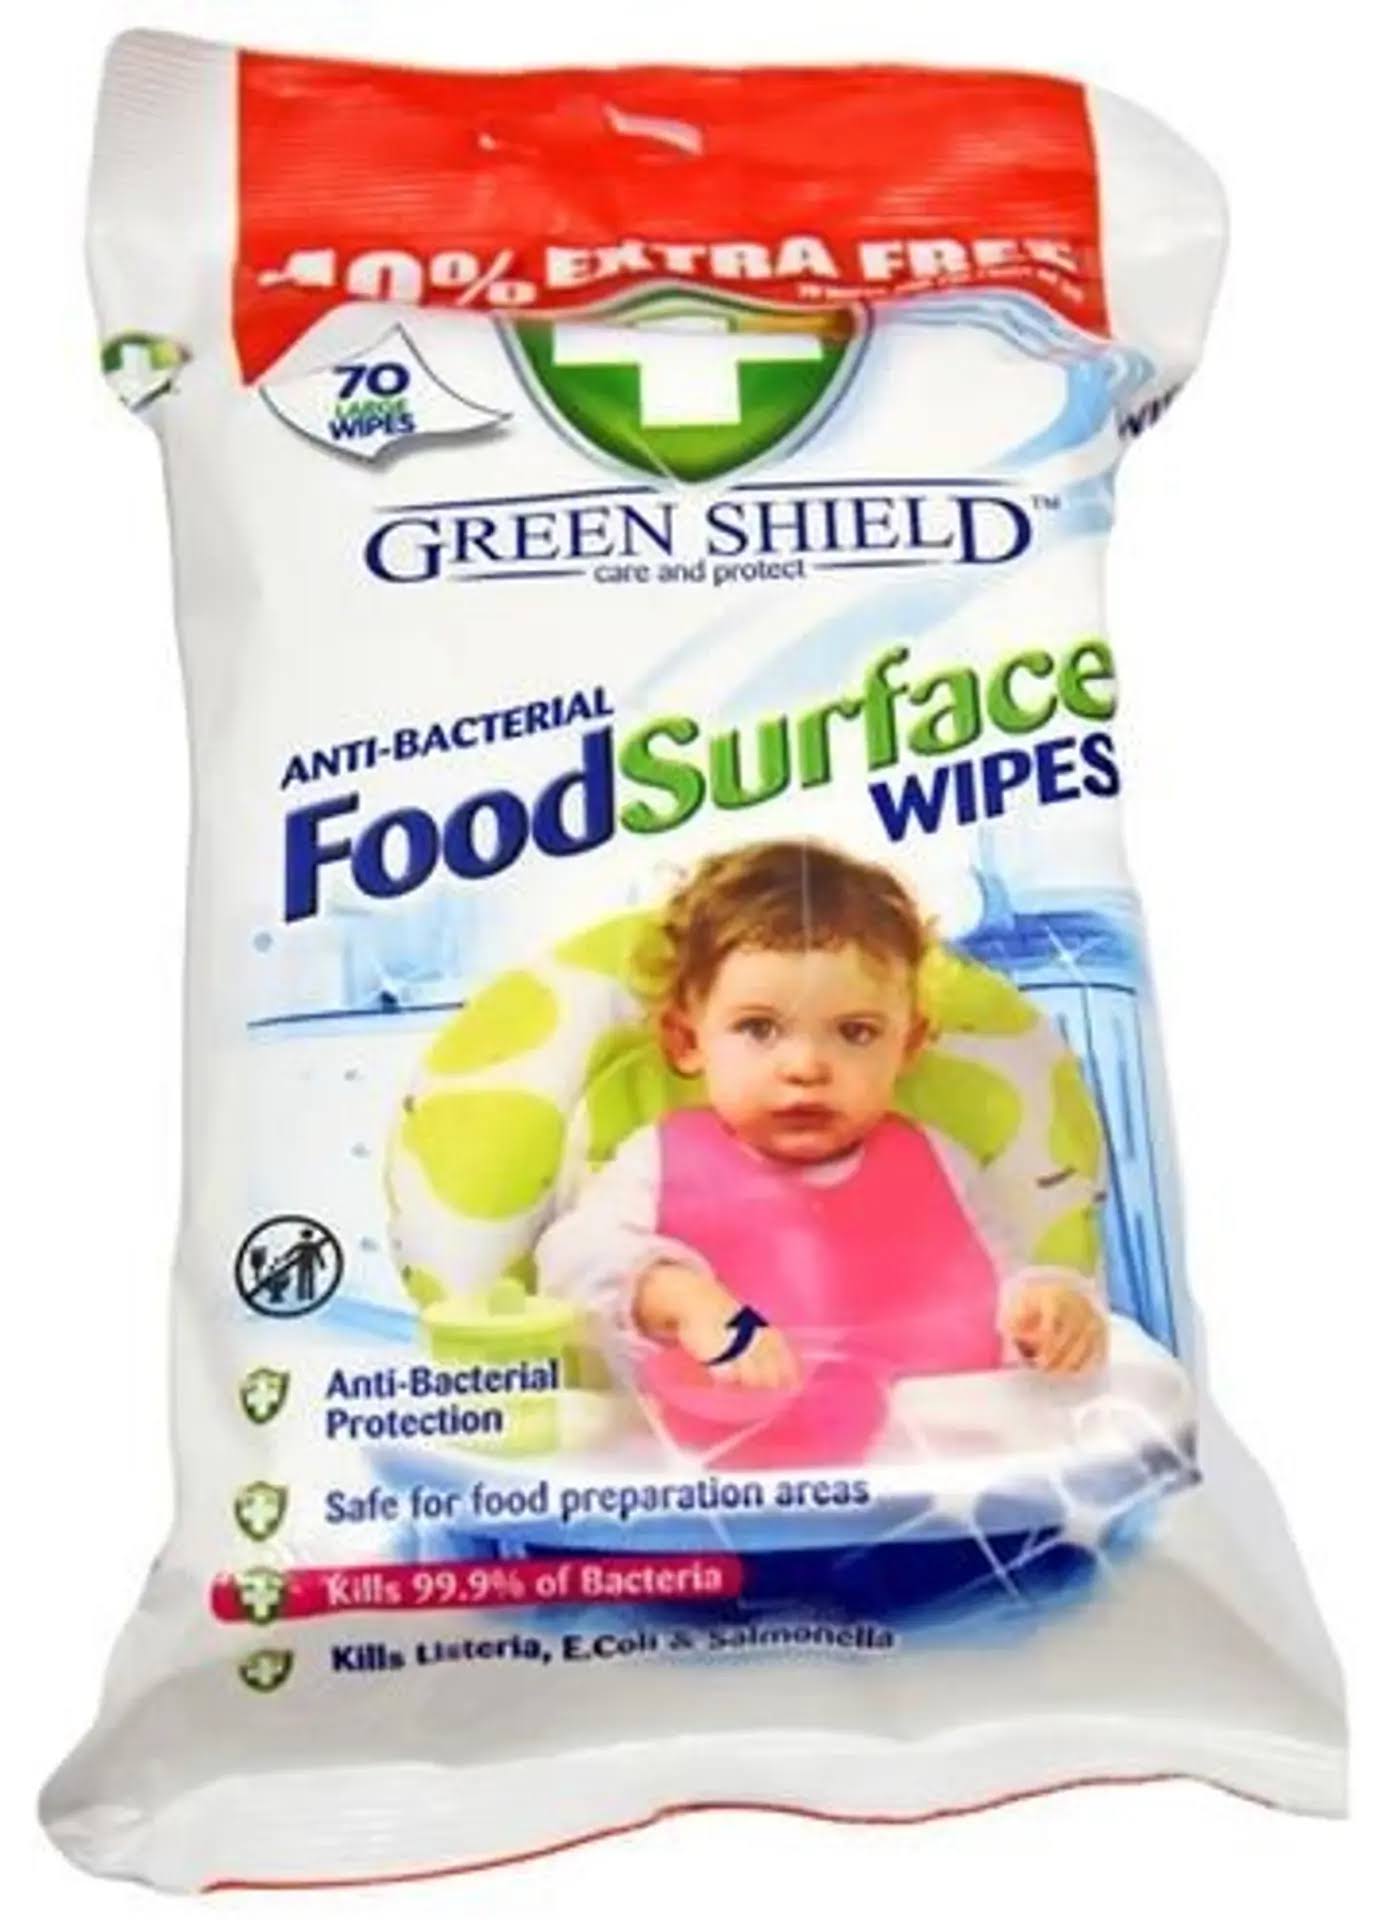 Green Shield Anti-Bacterial Food Surface Wipes - 70 Wipes